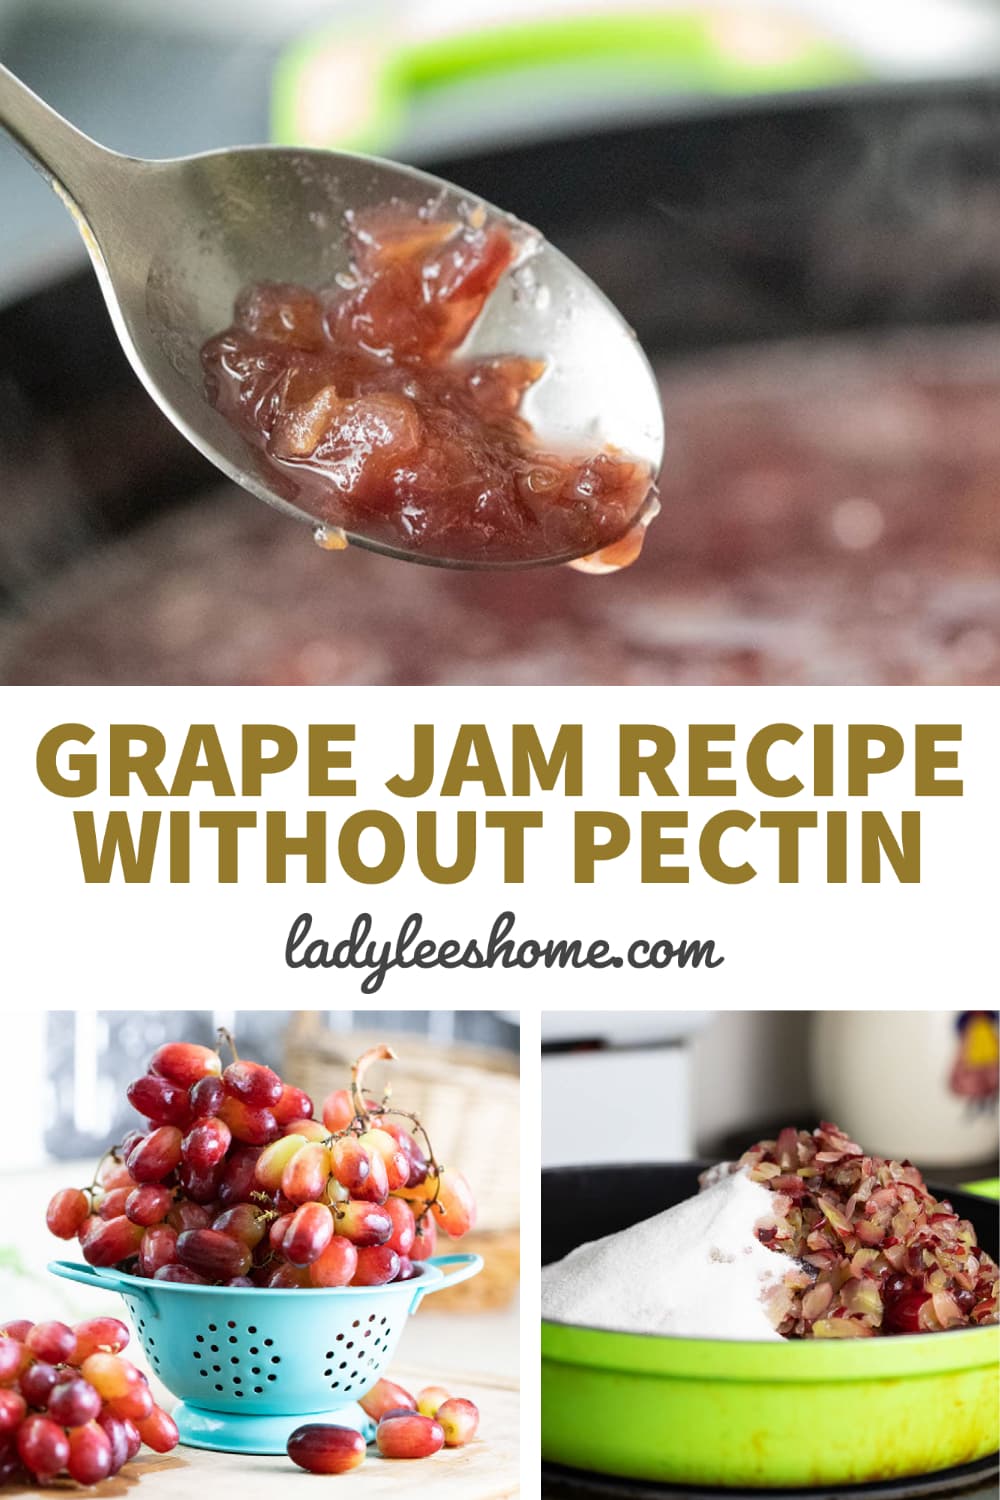 This grape jam recipe is simple to make. It uses seedless grapes that are easy to find, less sugar, and no store-bought pectin. This simple grape jam recipe without pectin is also very easy to can and is a great way to preserve grapes! 